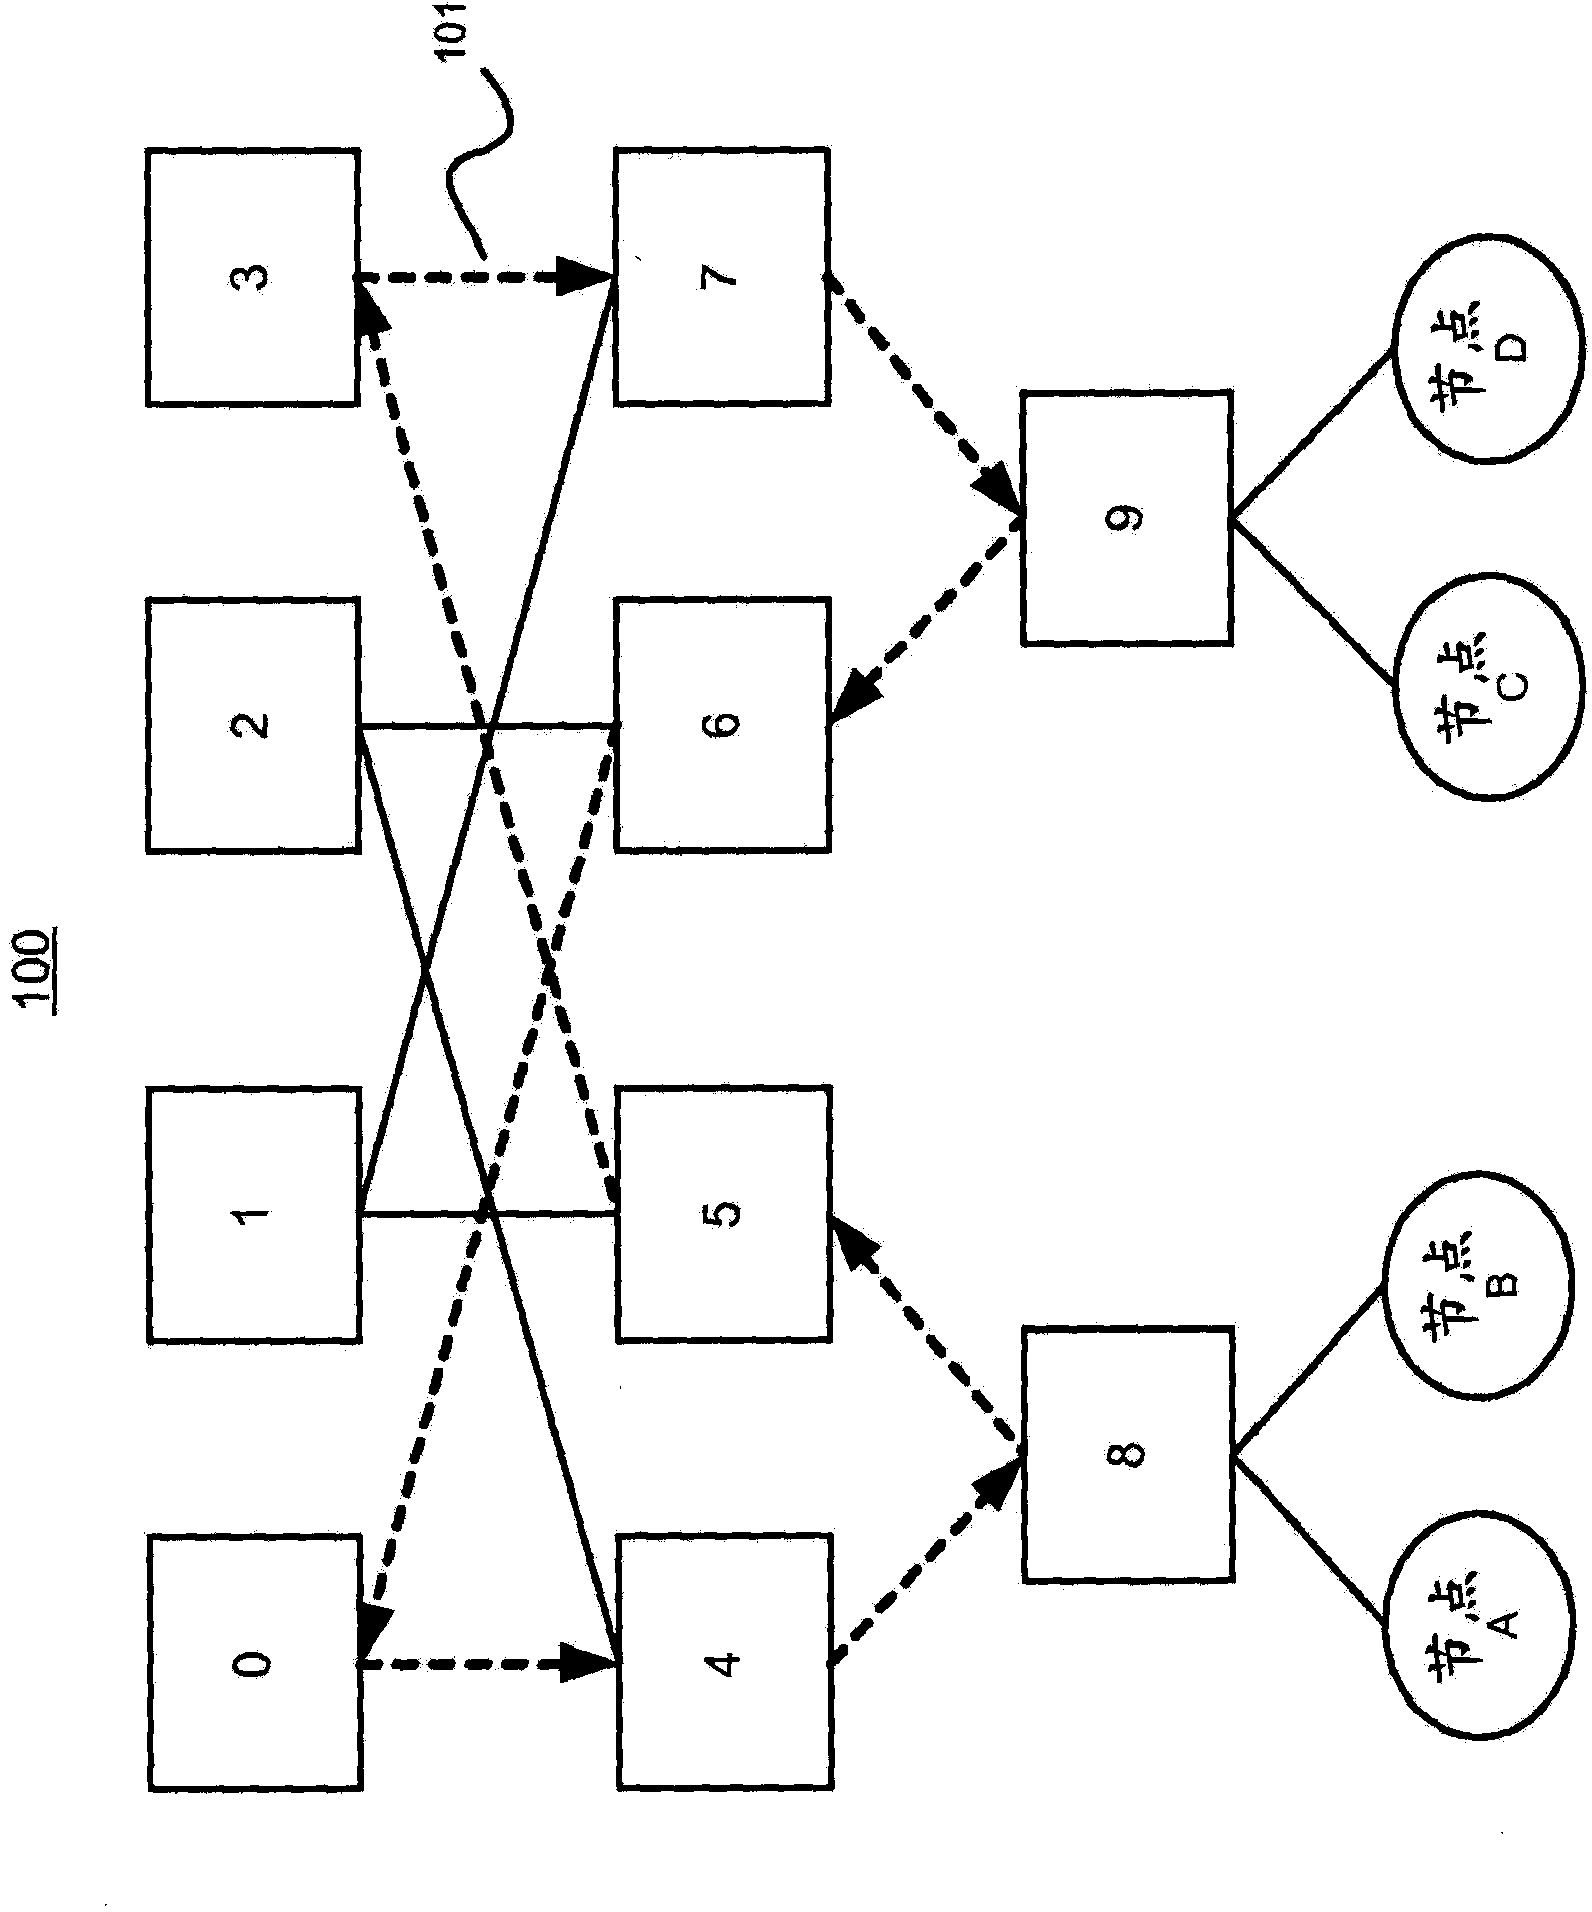 System and method for providing deadlock free routing between switches in a fat-tree topology